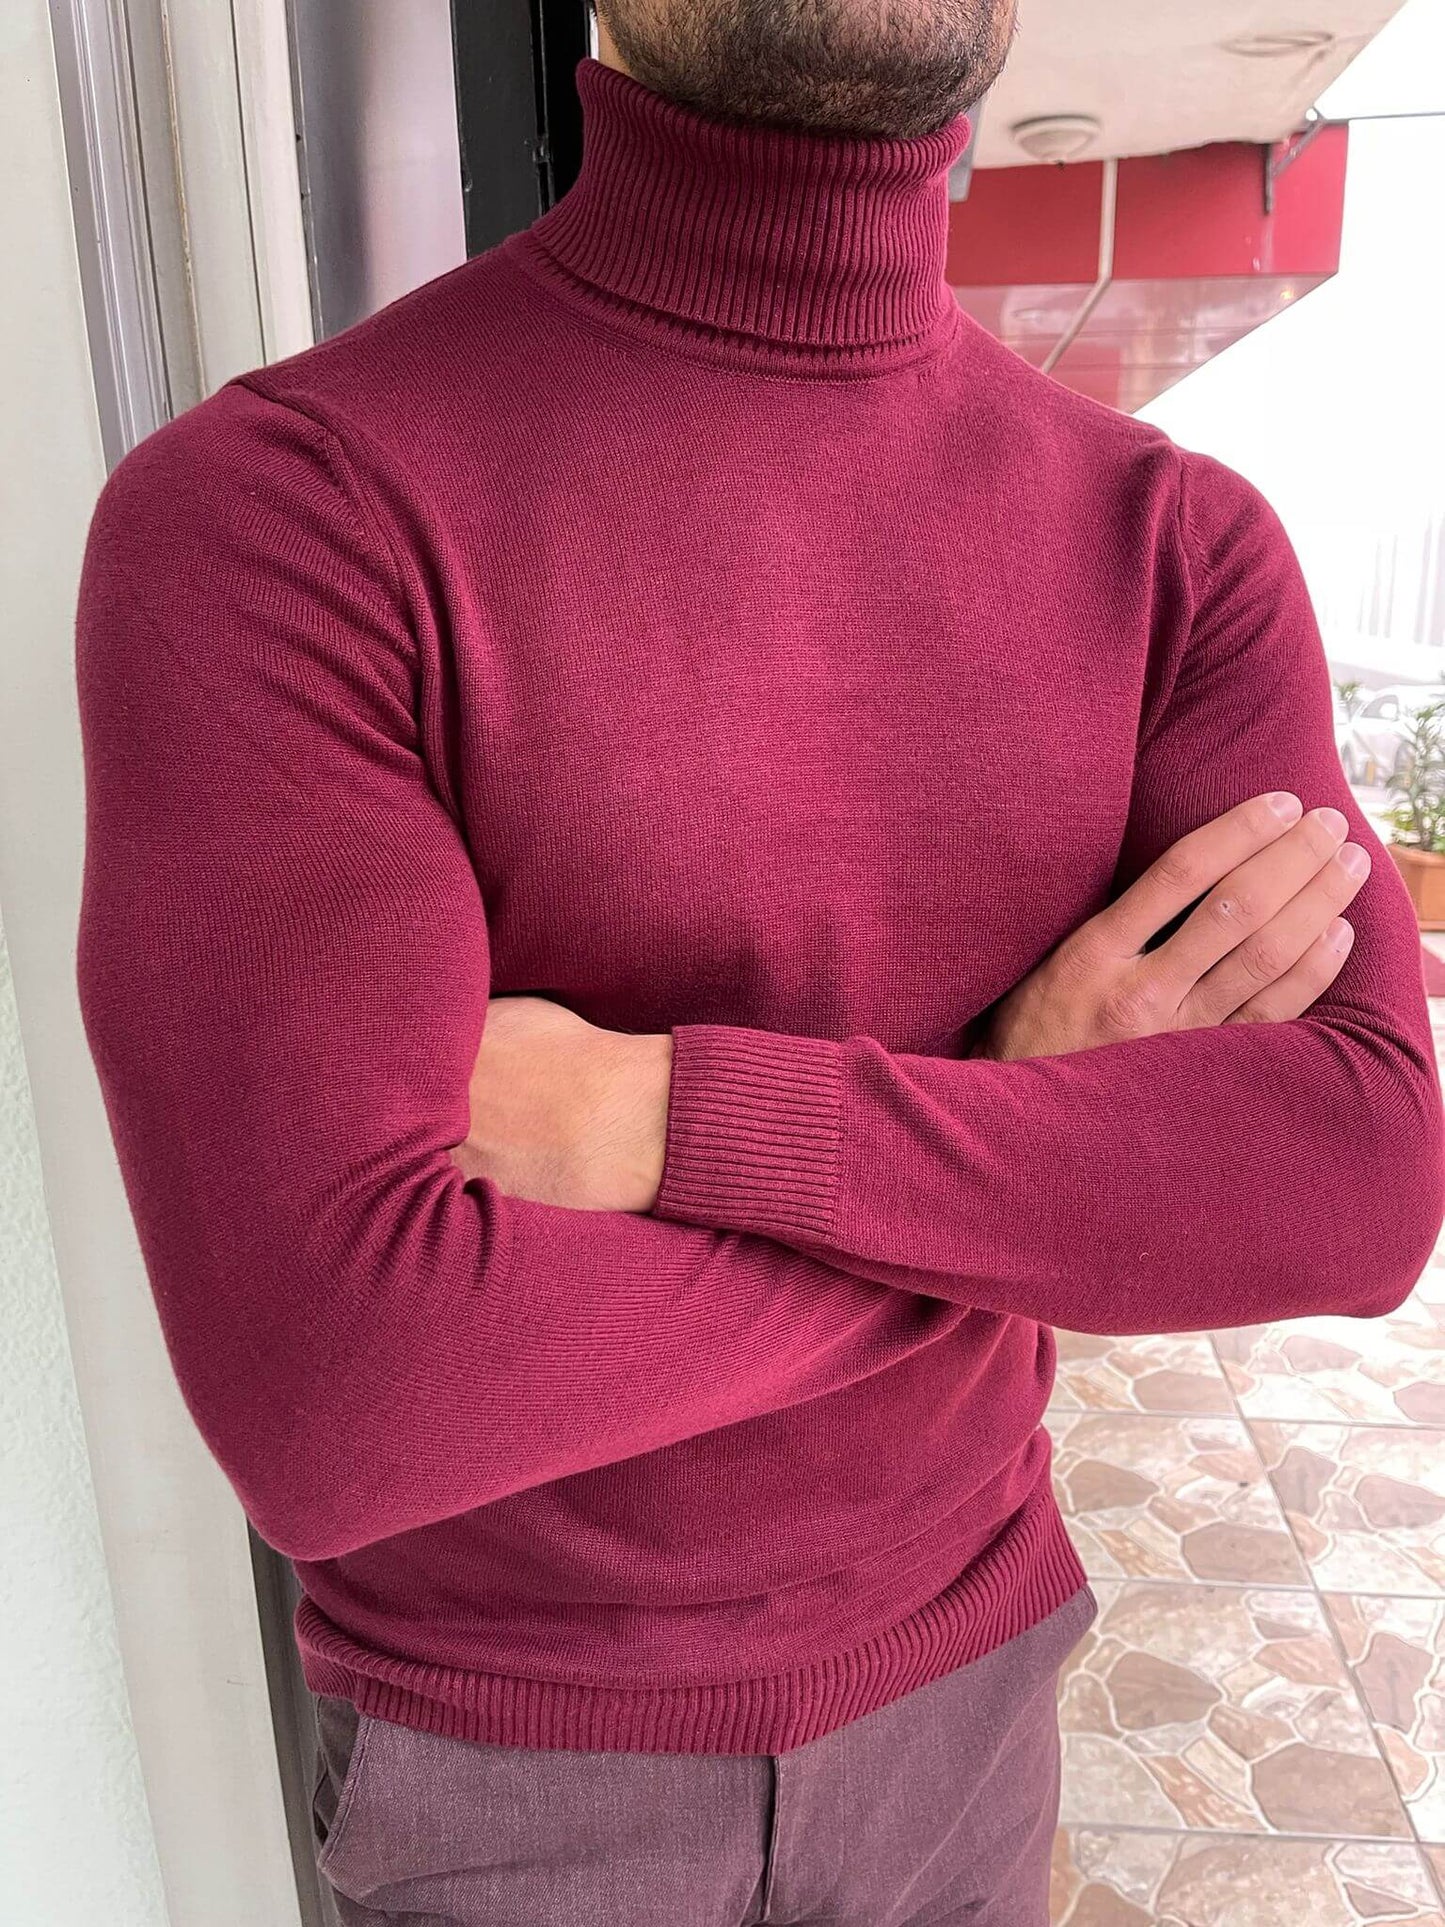 Claret Red Turtleneck sweater, featuring a high neckline and a smooth, ribbed texture.